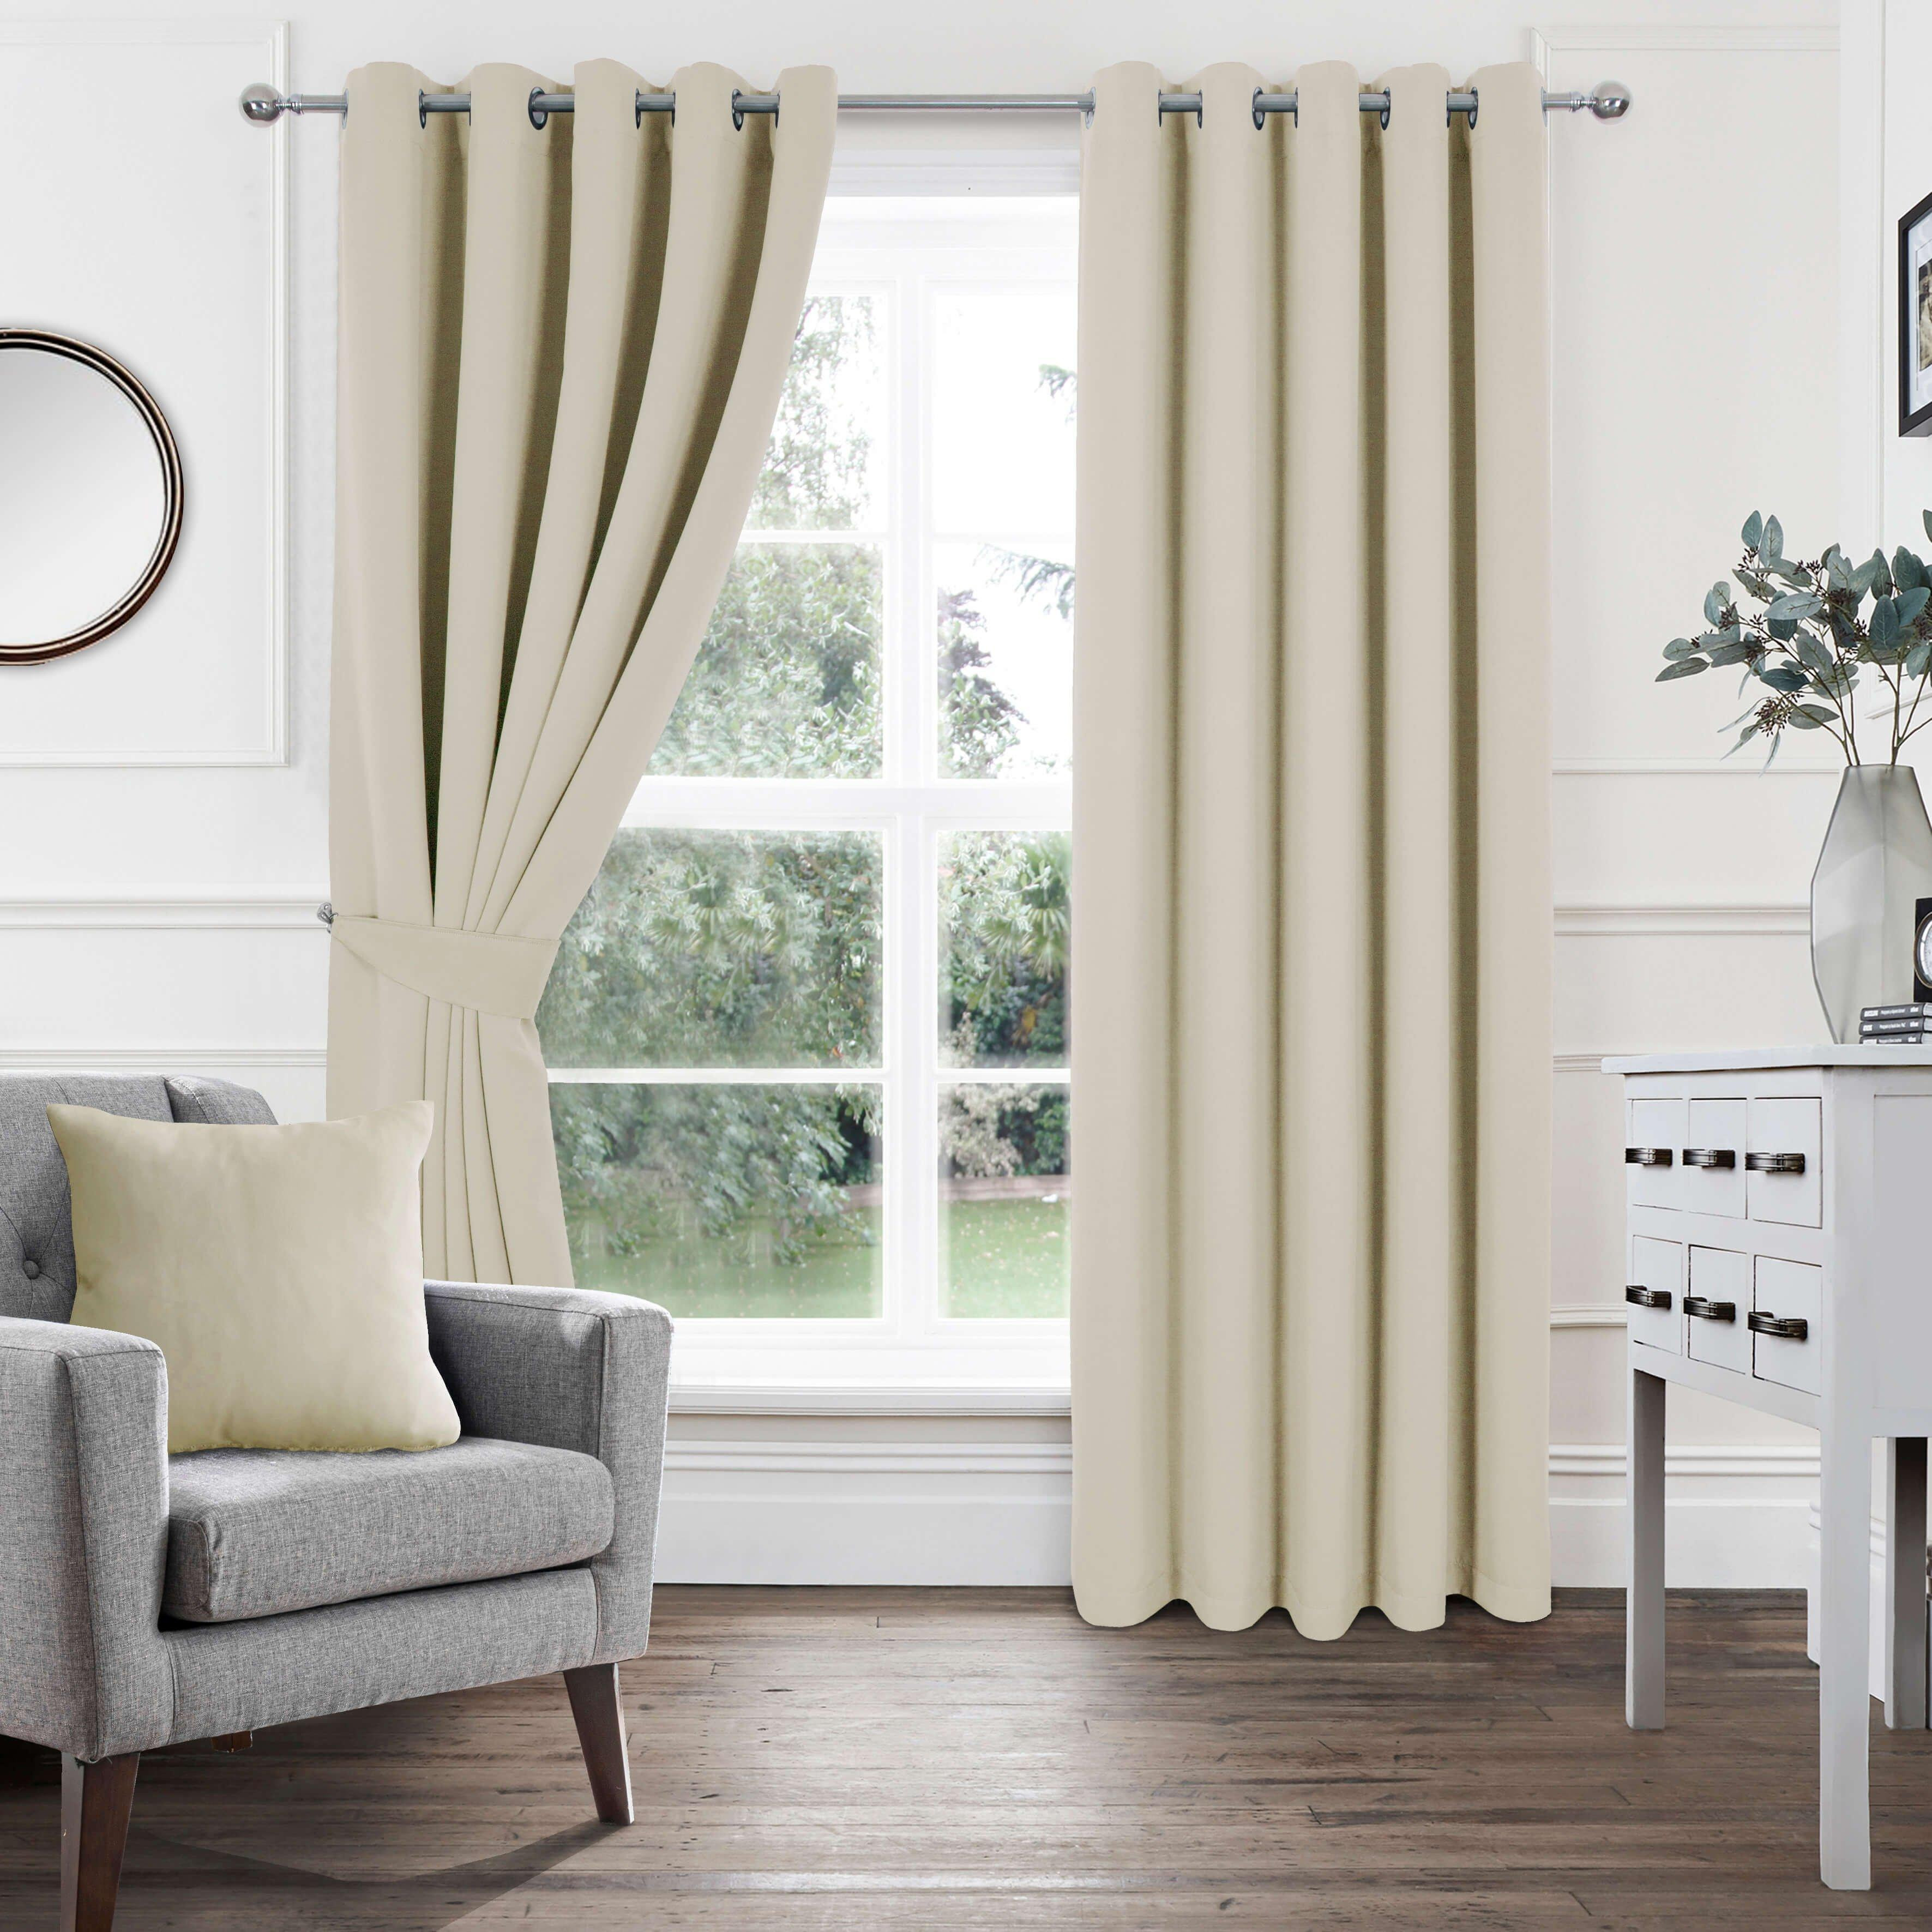 Woven Blockout Eyelet Curtains pair - image 1